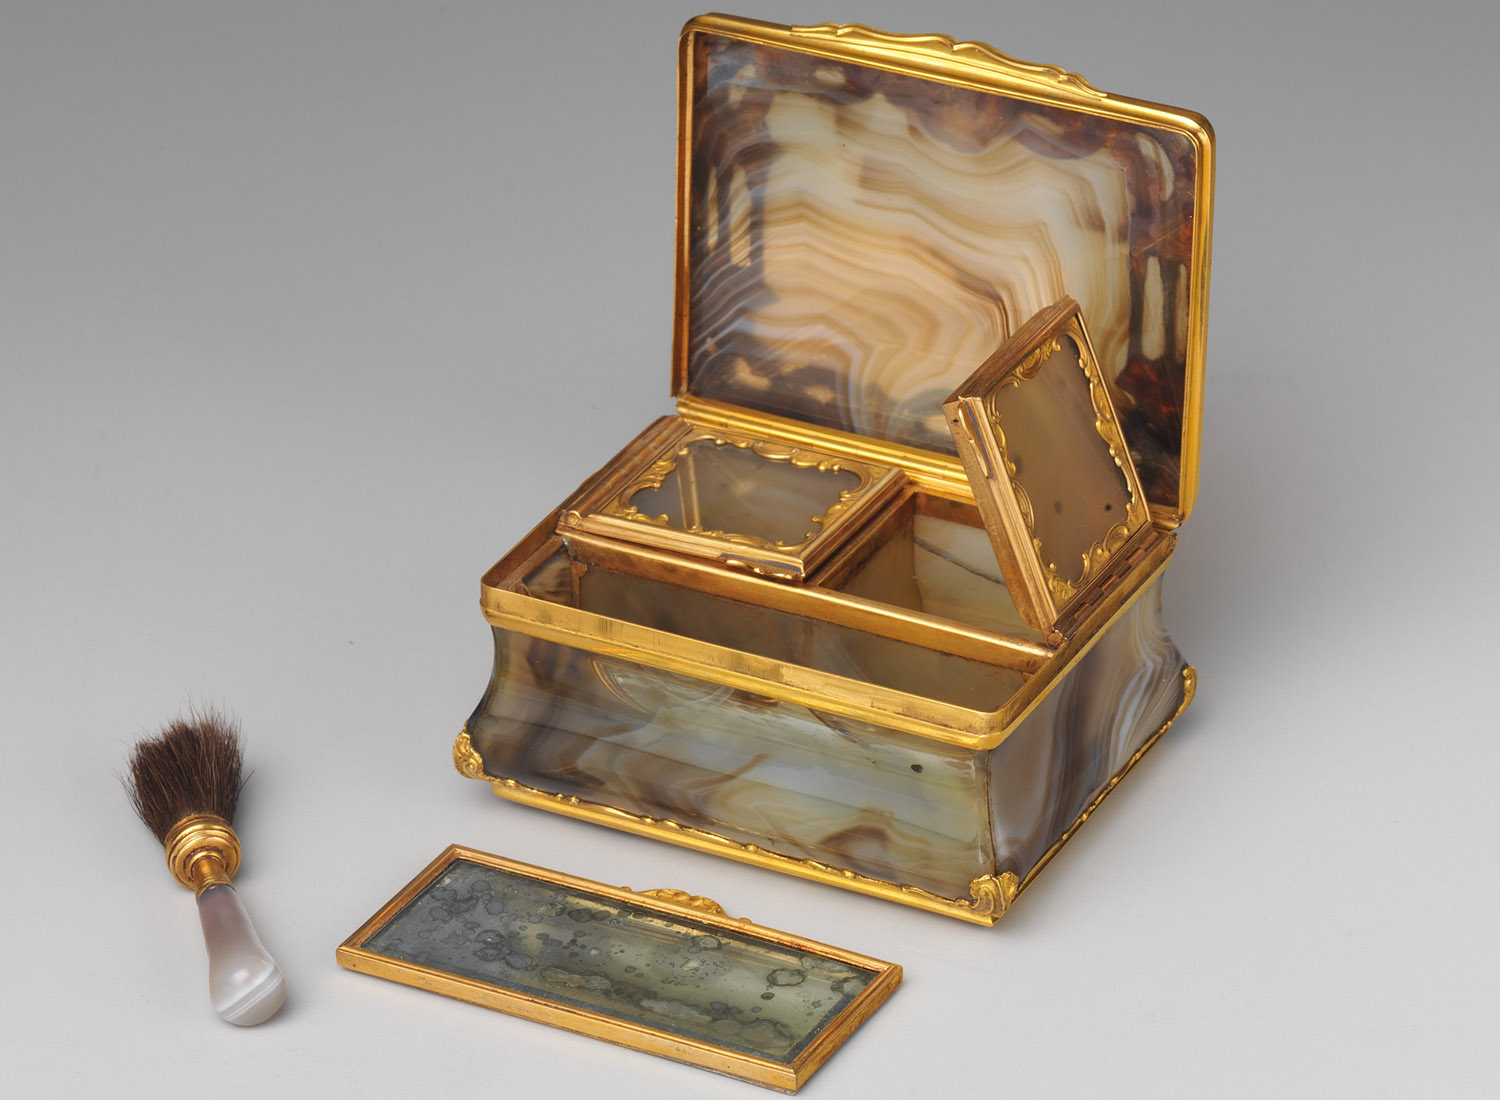 Resembling a snuffbox but smaller in size, this boîte à mouches contains two closed compartments—one to hold rouge and the other for black taffeta patches. A tiny brush and mirror were placed in the larger compartment.